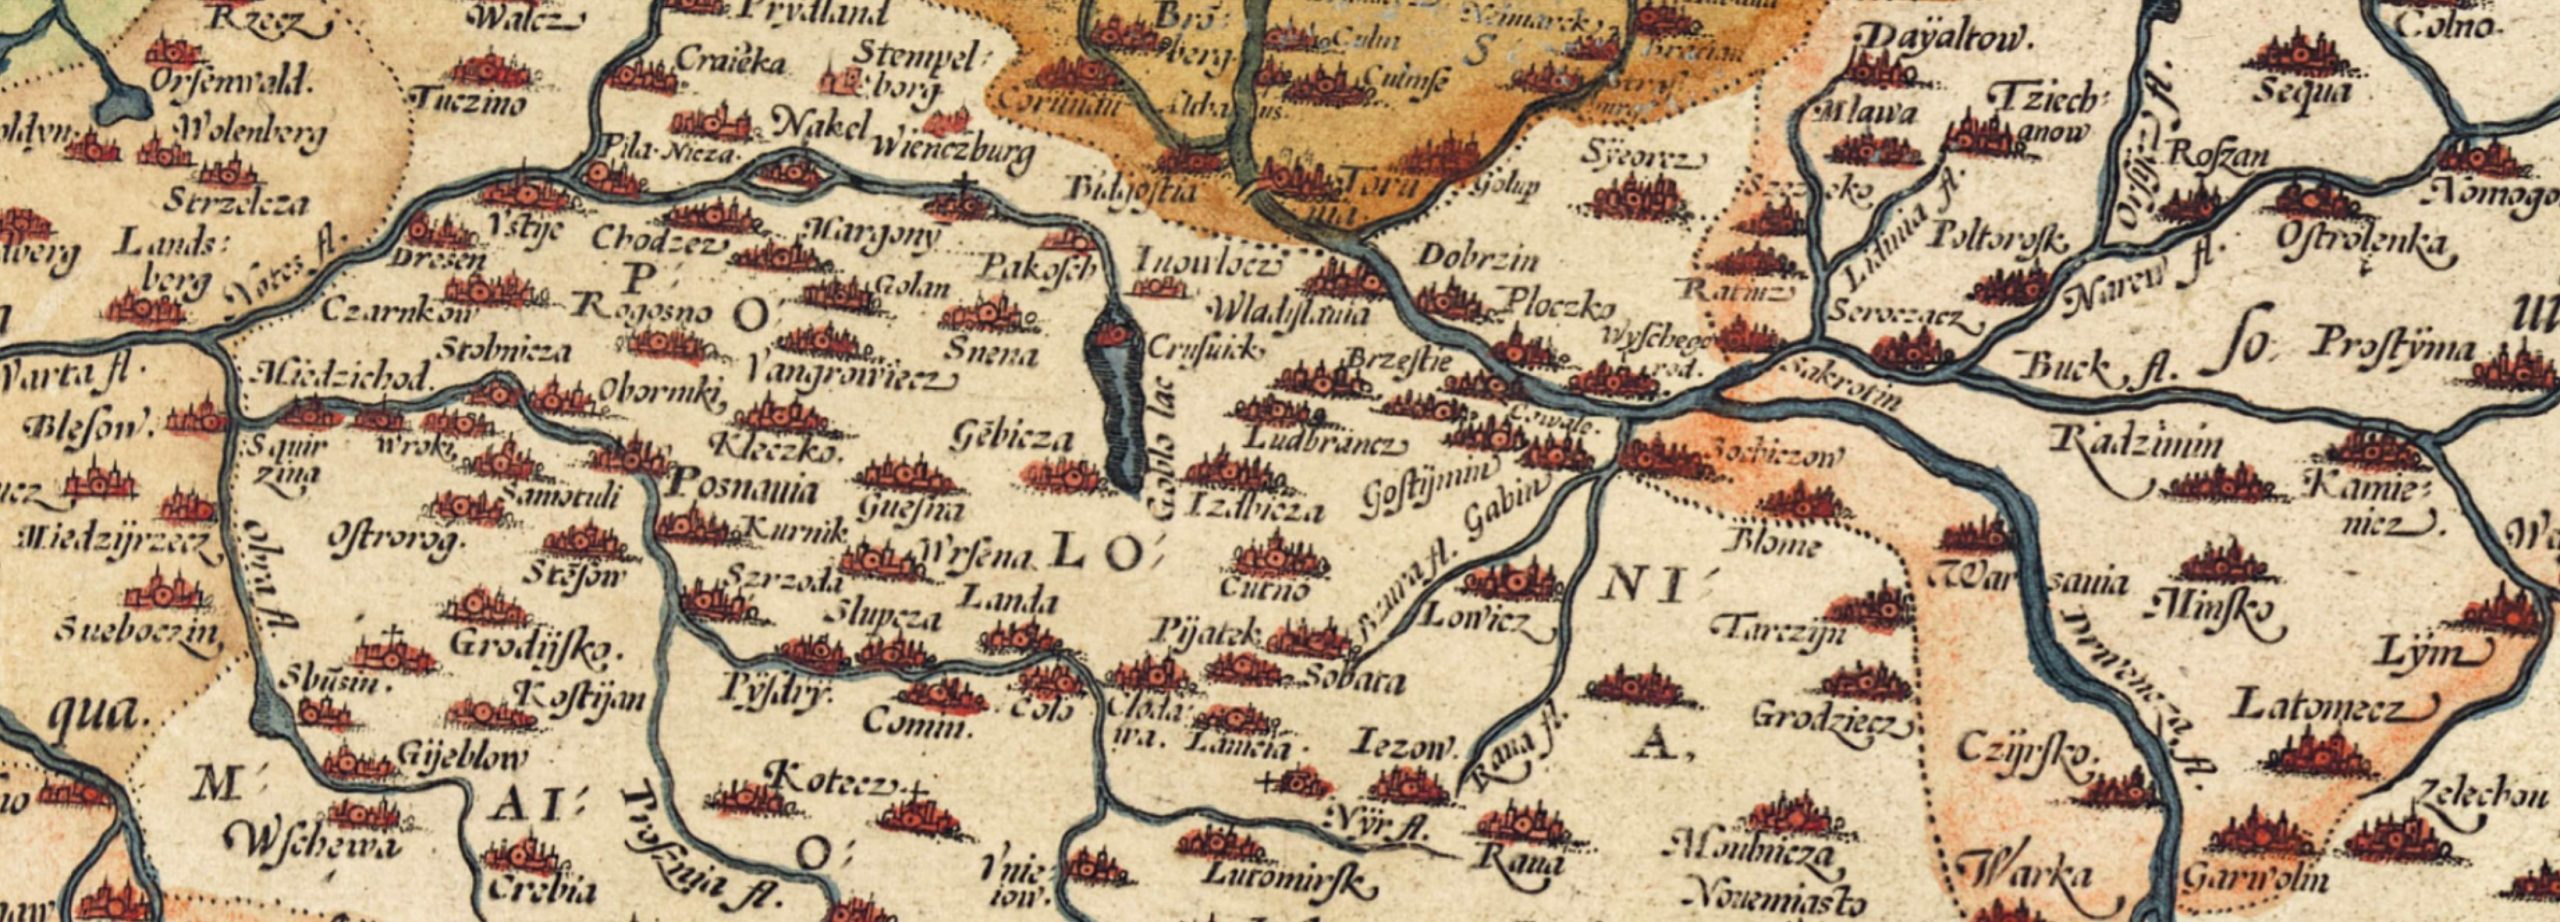 Fig. 3. Detail of the map of Poland by Wacław Grodecki, printed in Ortelius’s Theatrum orbis terrarum Antwerp 1573); Public domain. From the copy of the State Library of New South Wales.